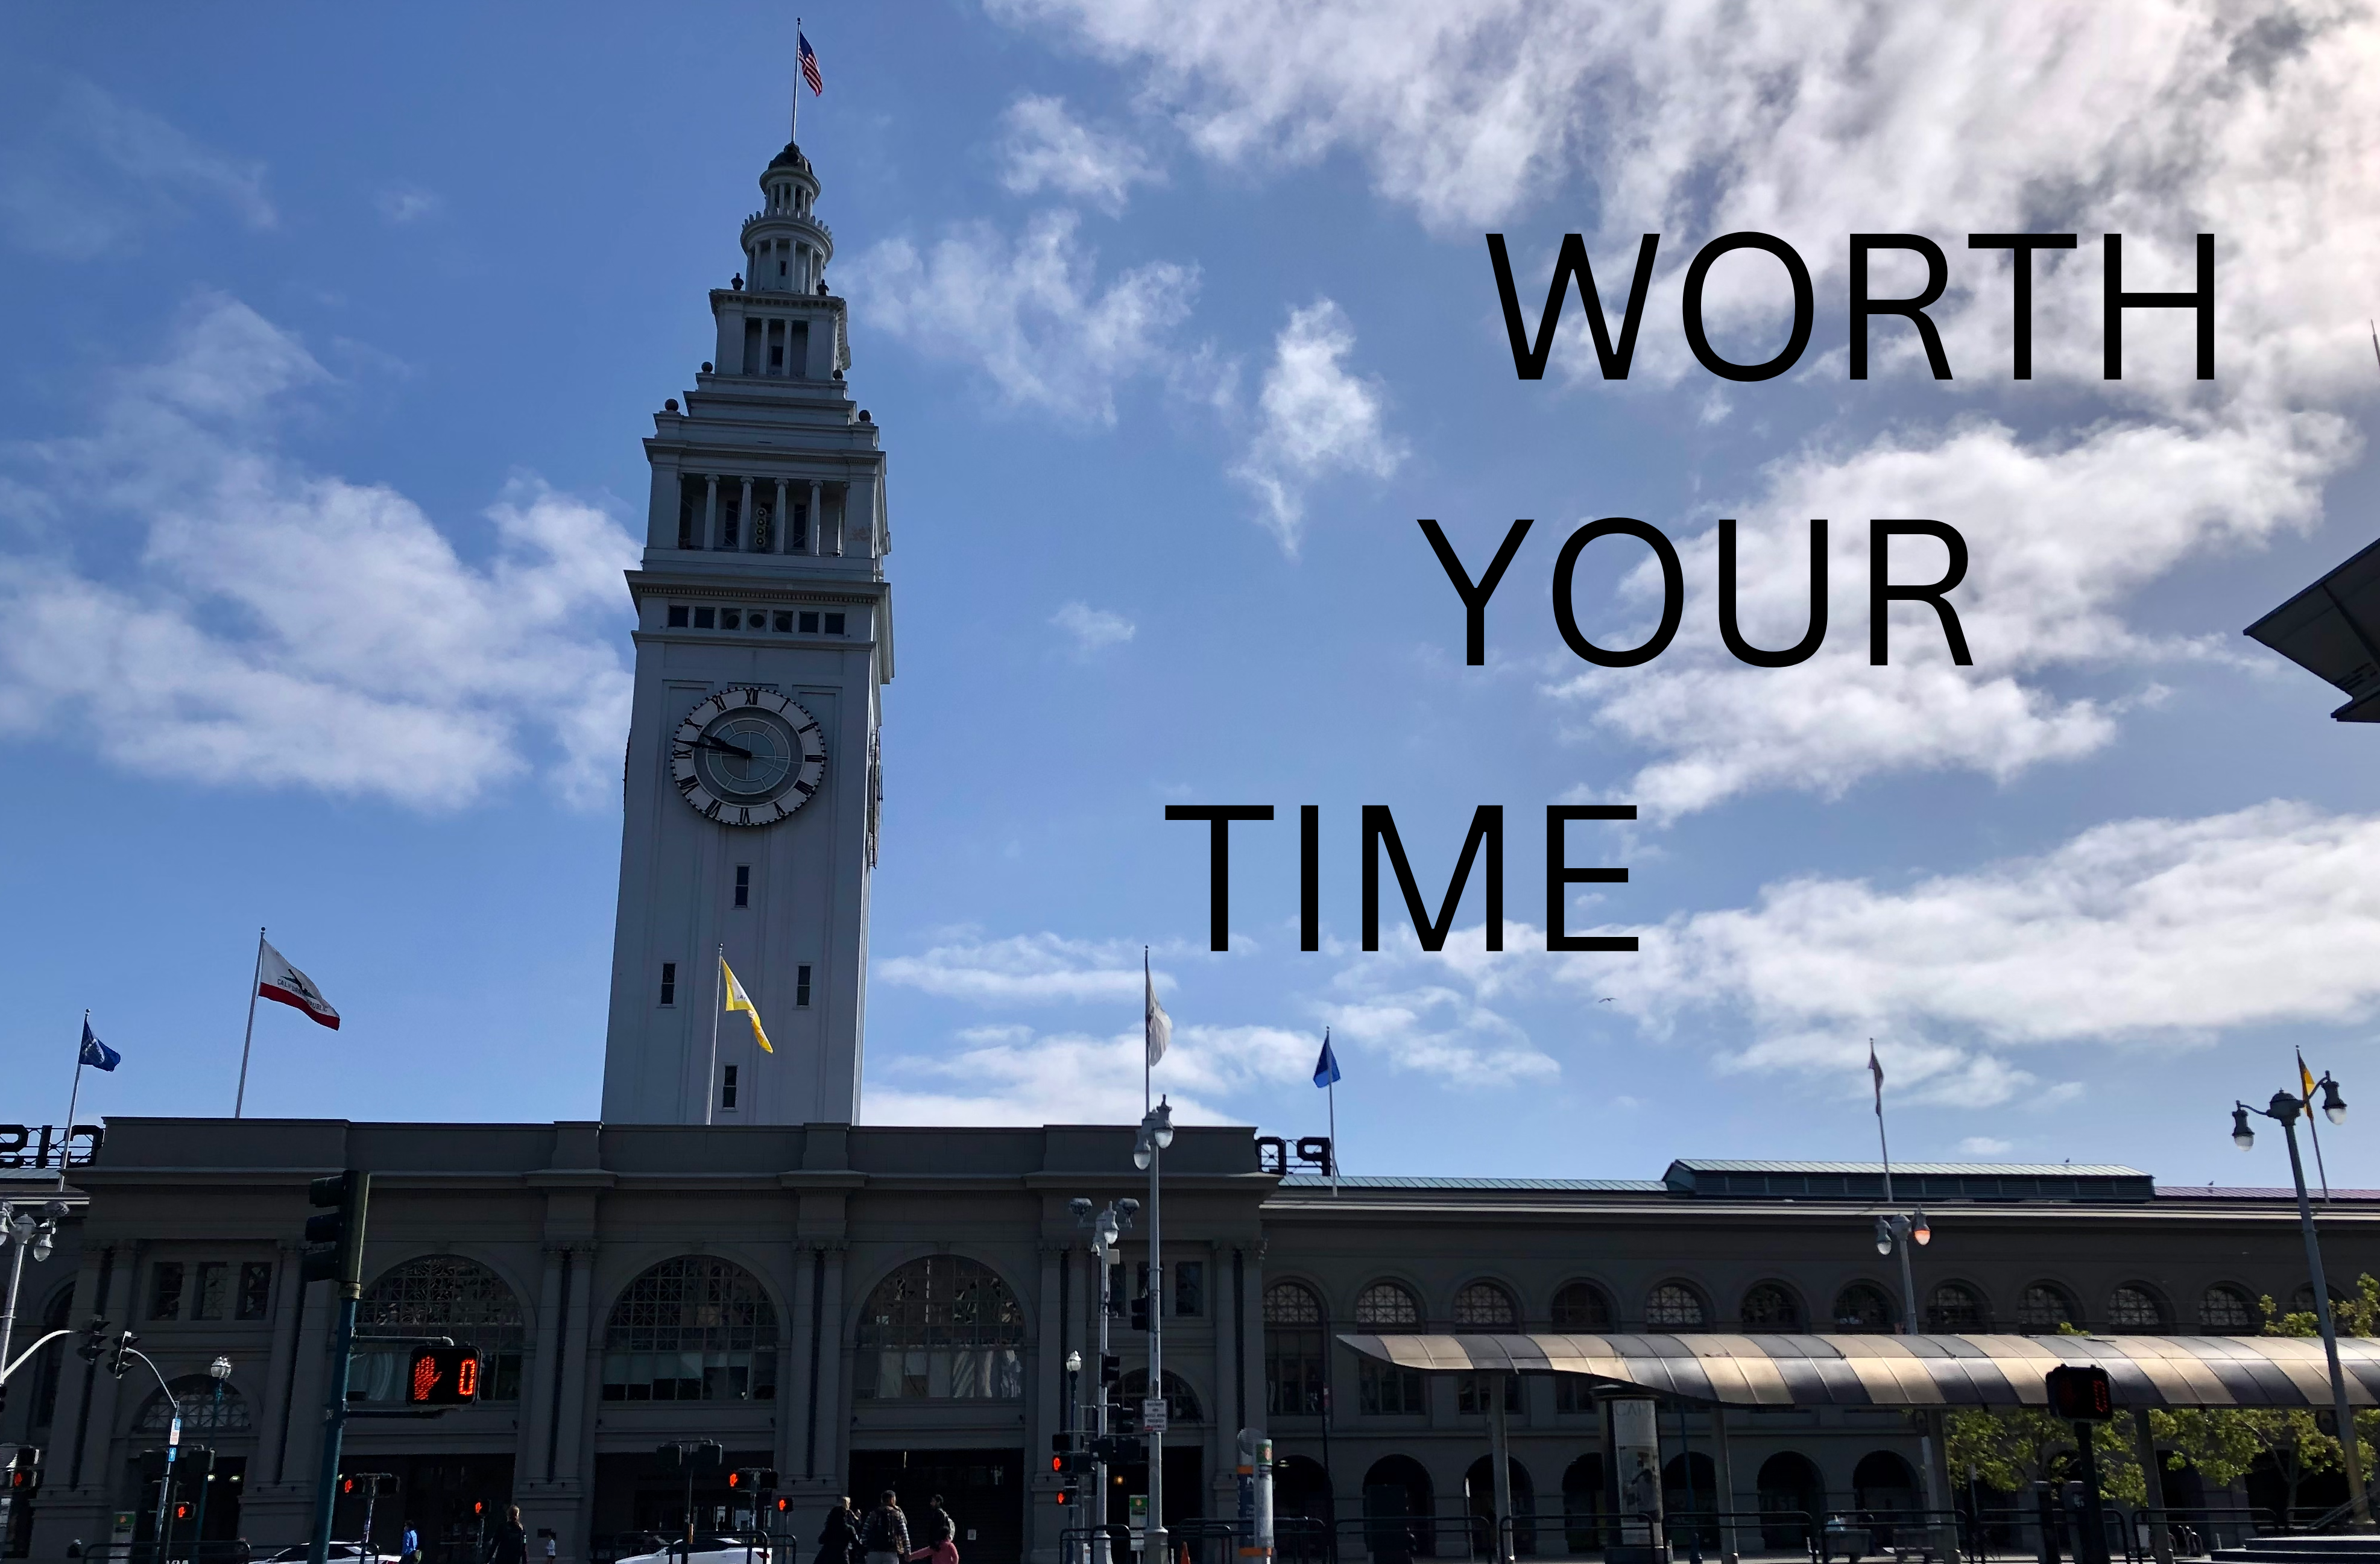 5 Reasons Why That WAS Worth Your Time